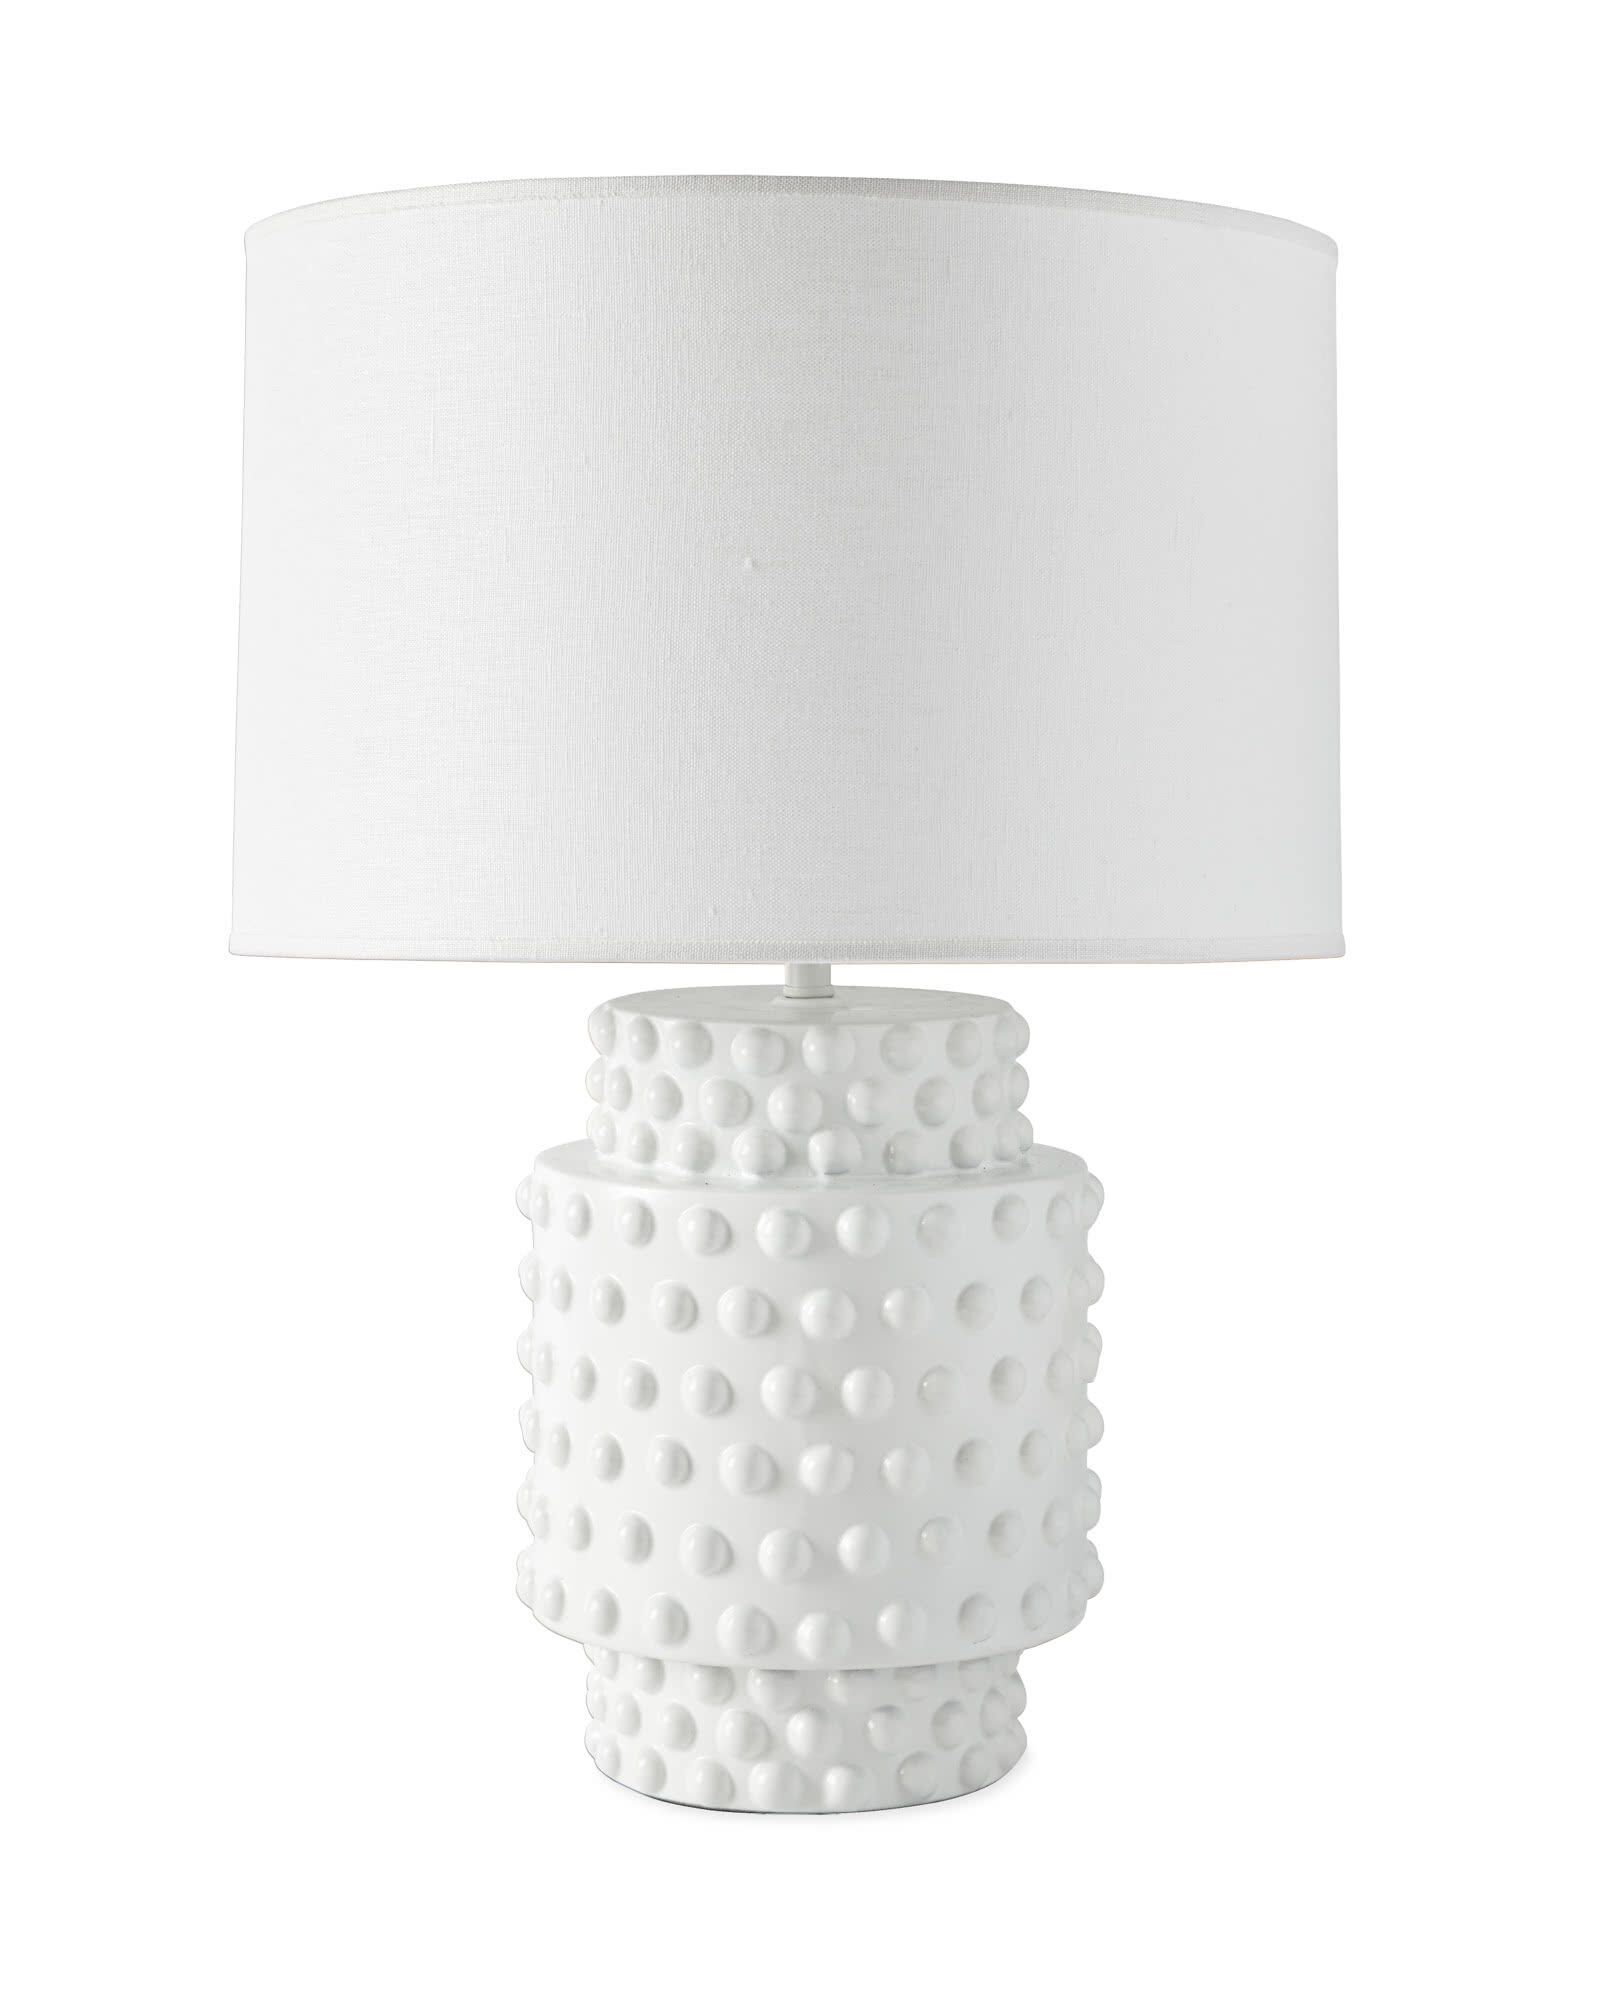 Tinsley Table Lamp | Serena and Lily